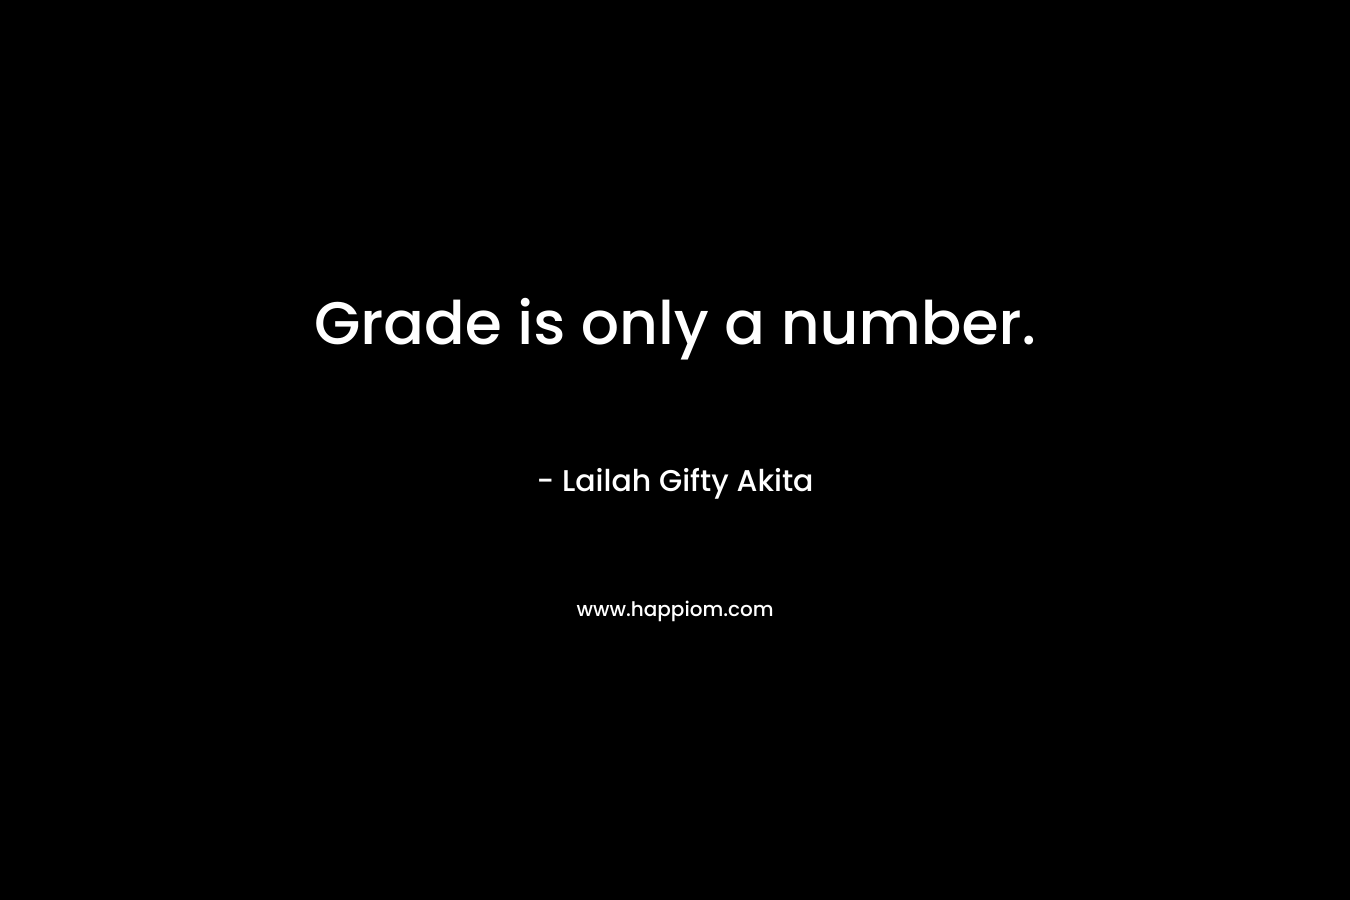 Grade is only a number.